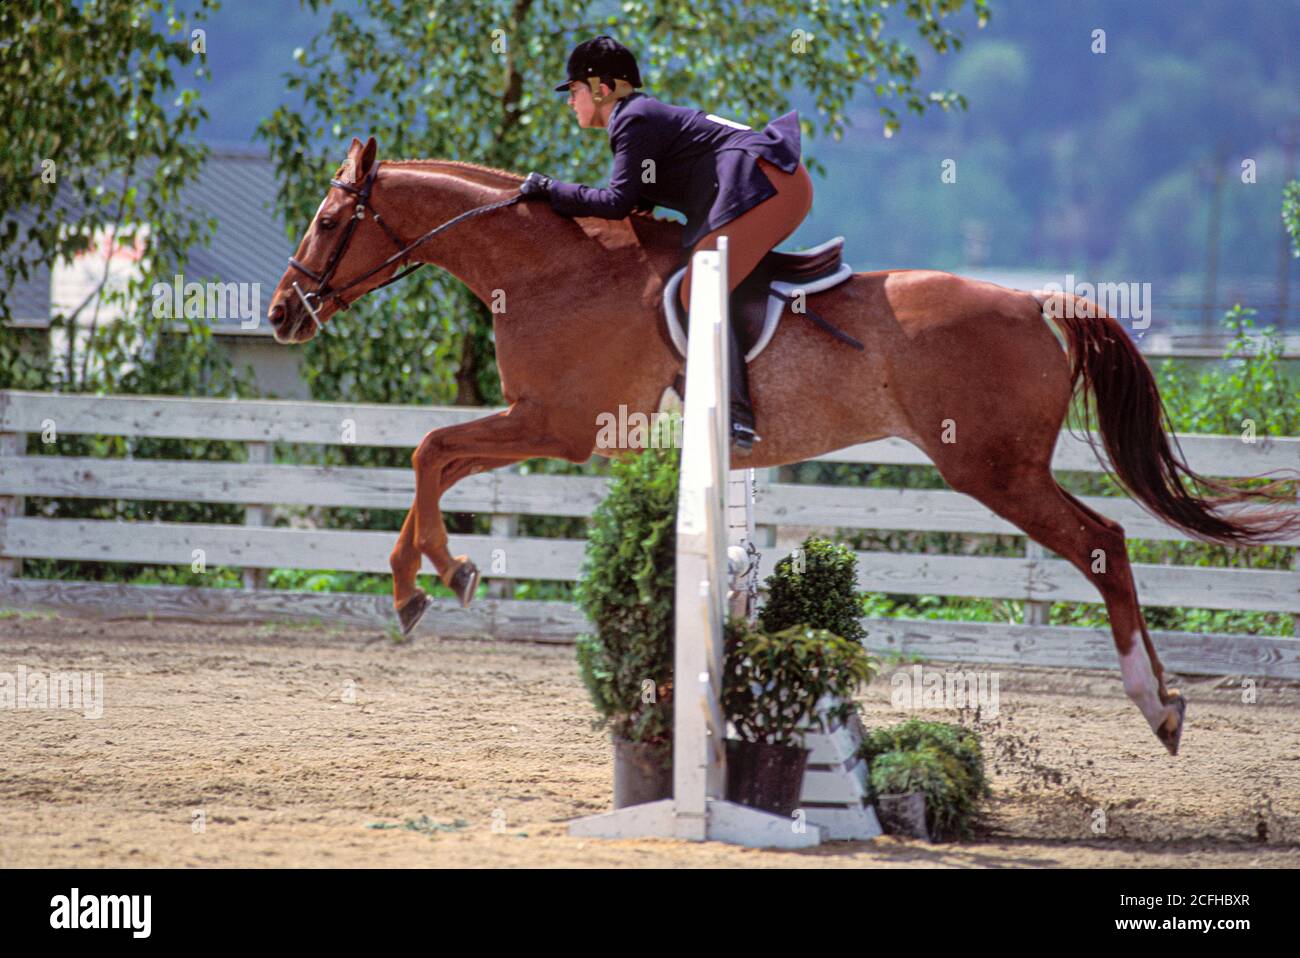 Horse and rider clear jump during competition, Monroe, Washington Stock Photo